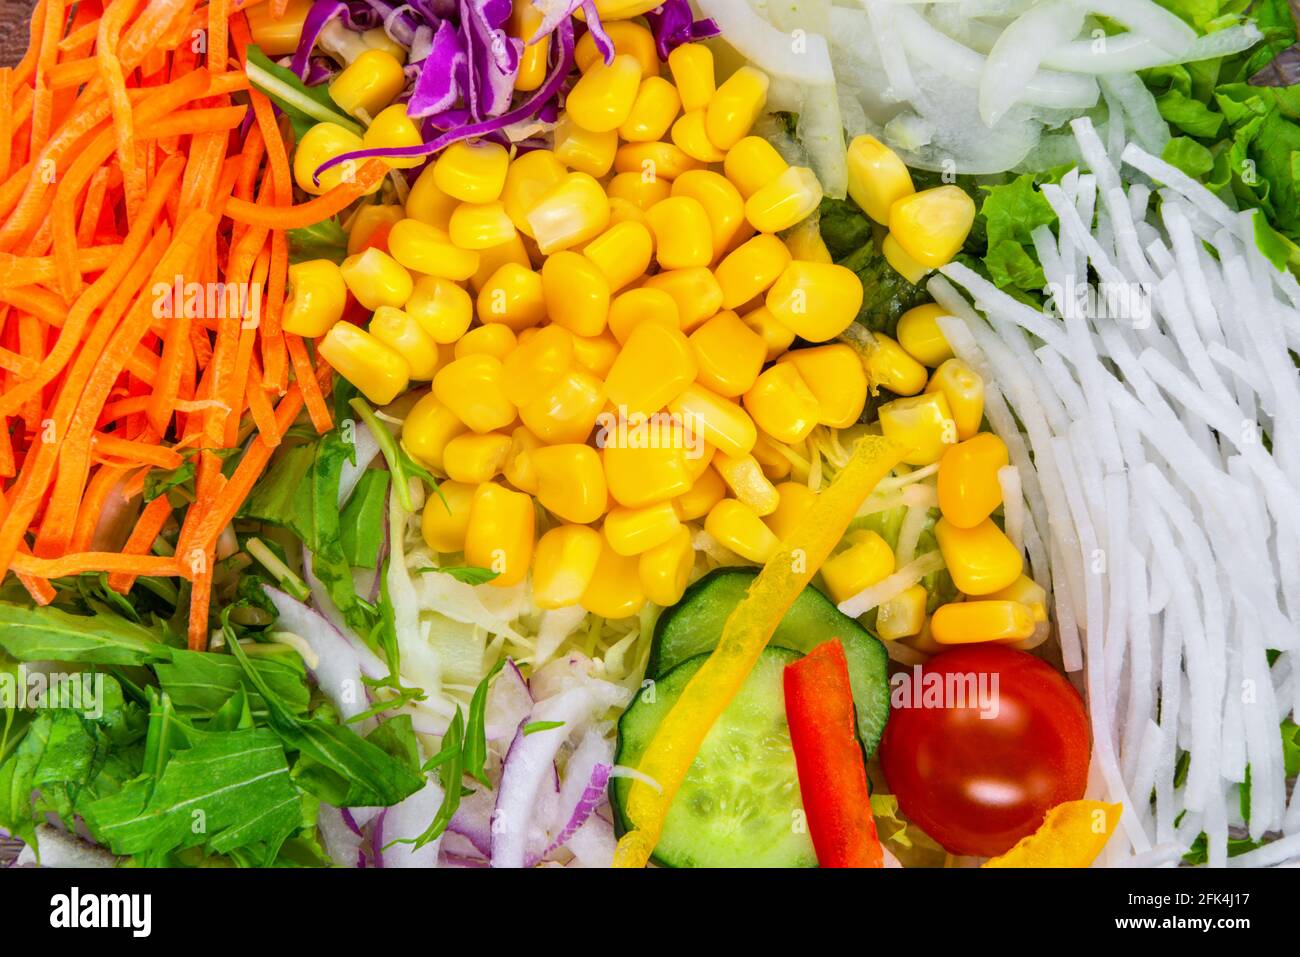 flat lay of mix stripes carrots, radish, onion, tomato, cabbage, cucumber and corn vegetables for salad, concept healthy eating Stock Photo